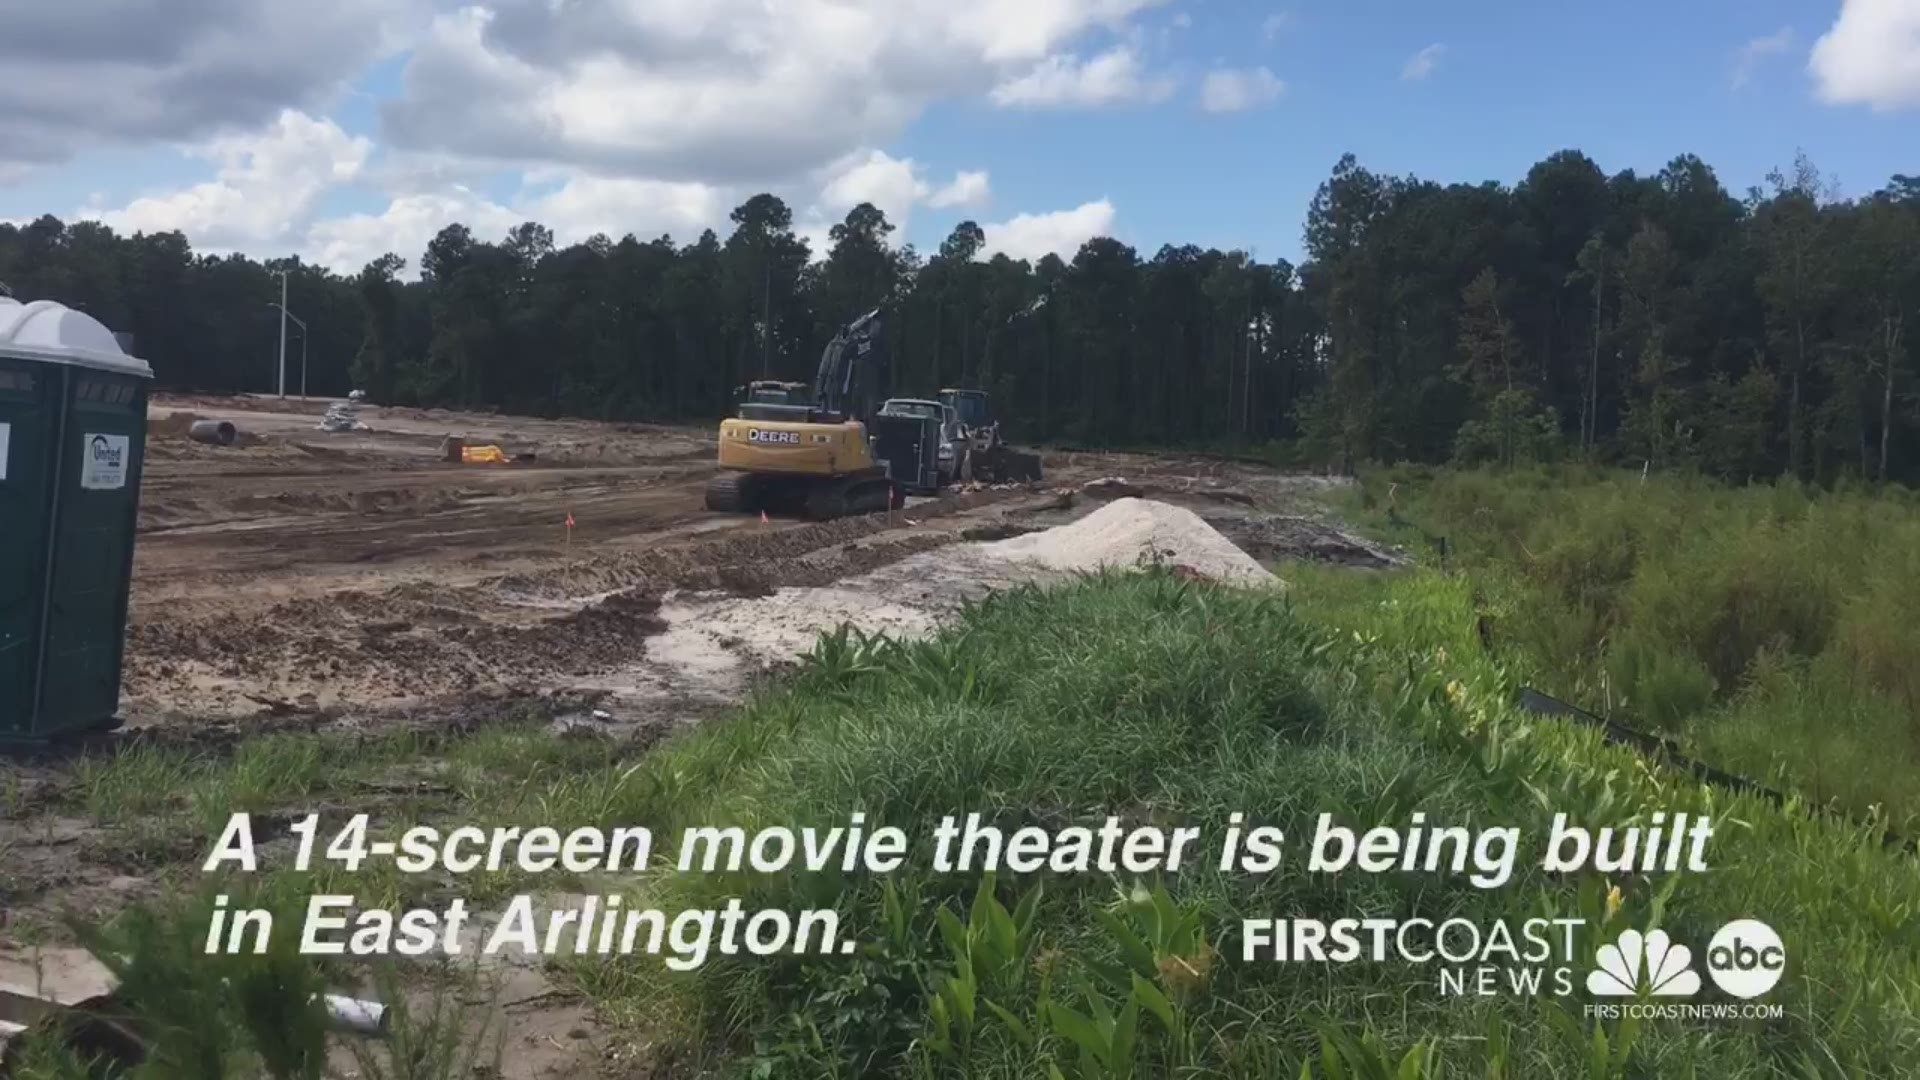 Cinemark is planning to open a brand new 14-screen movie theater in East Arlington.